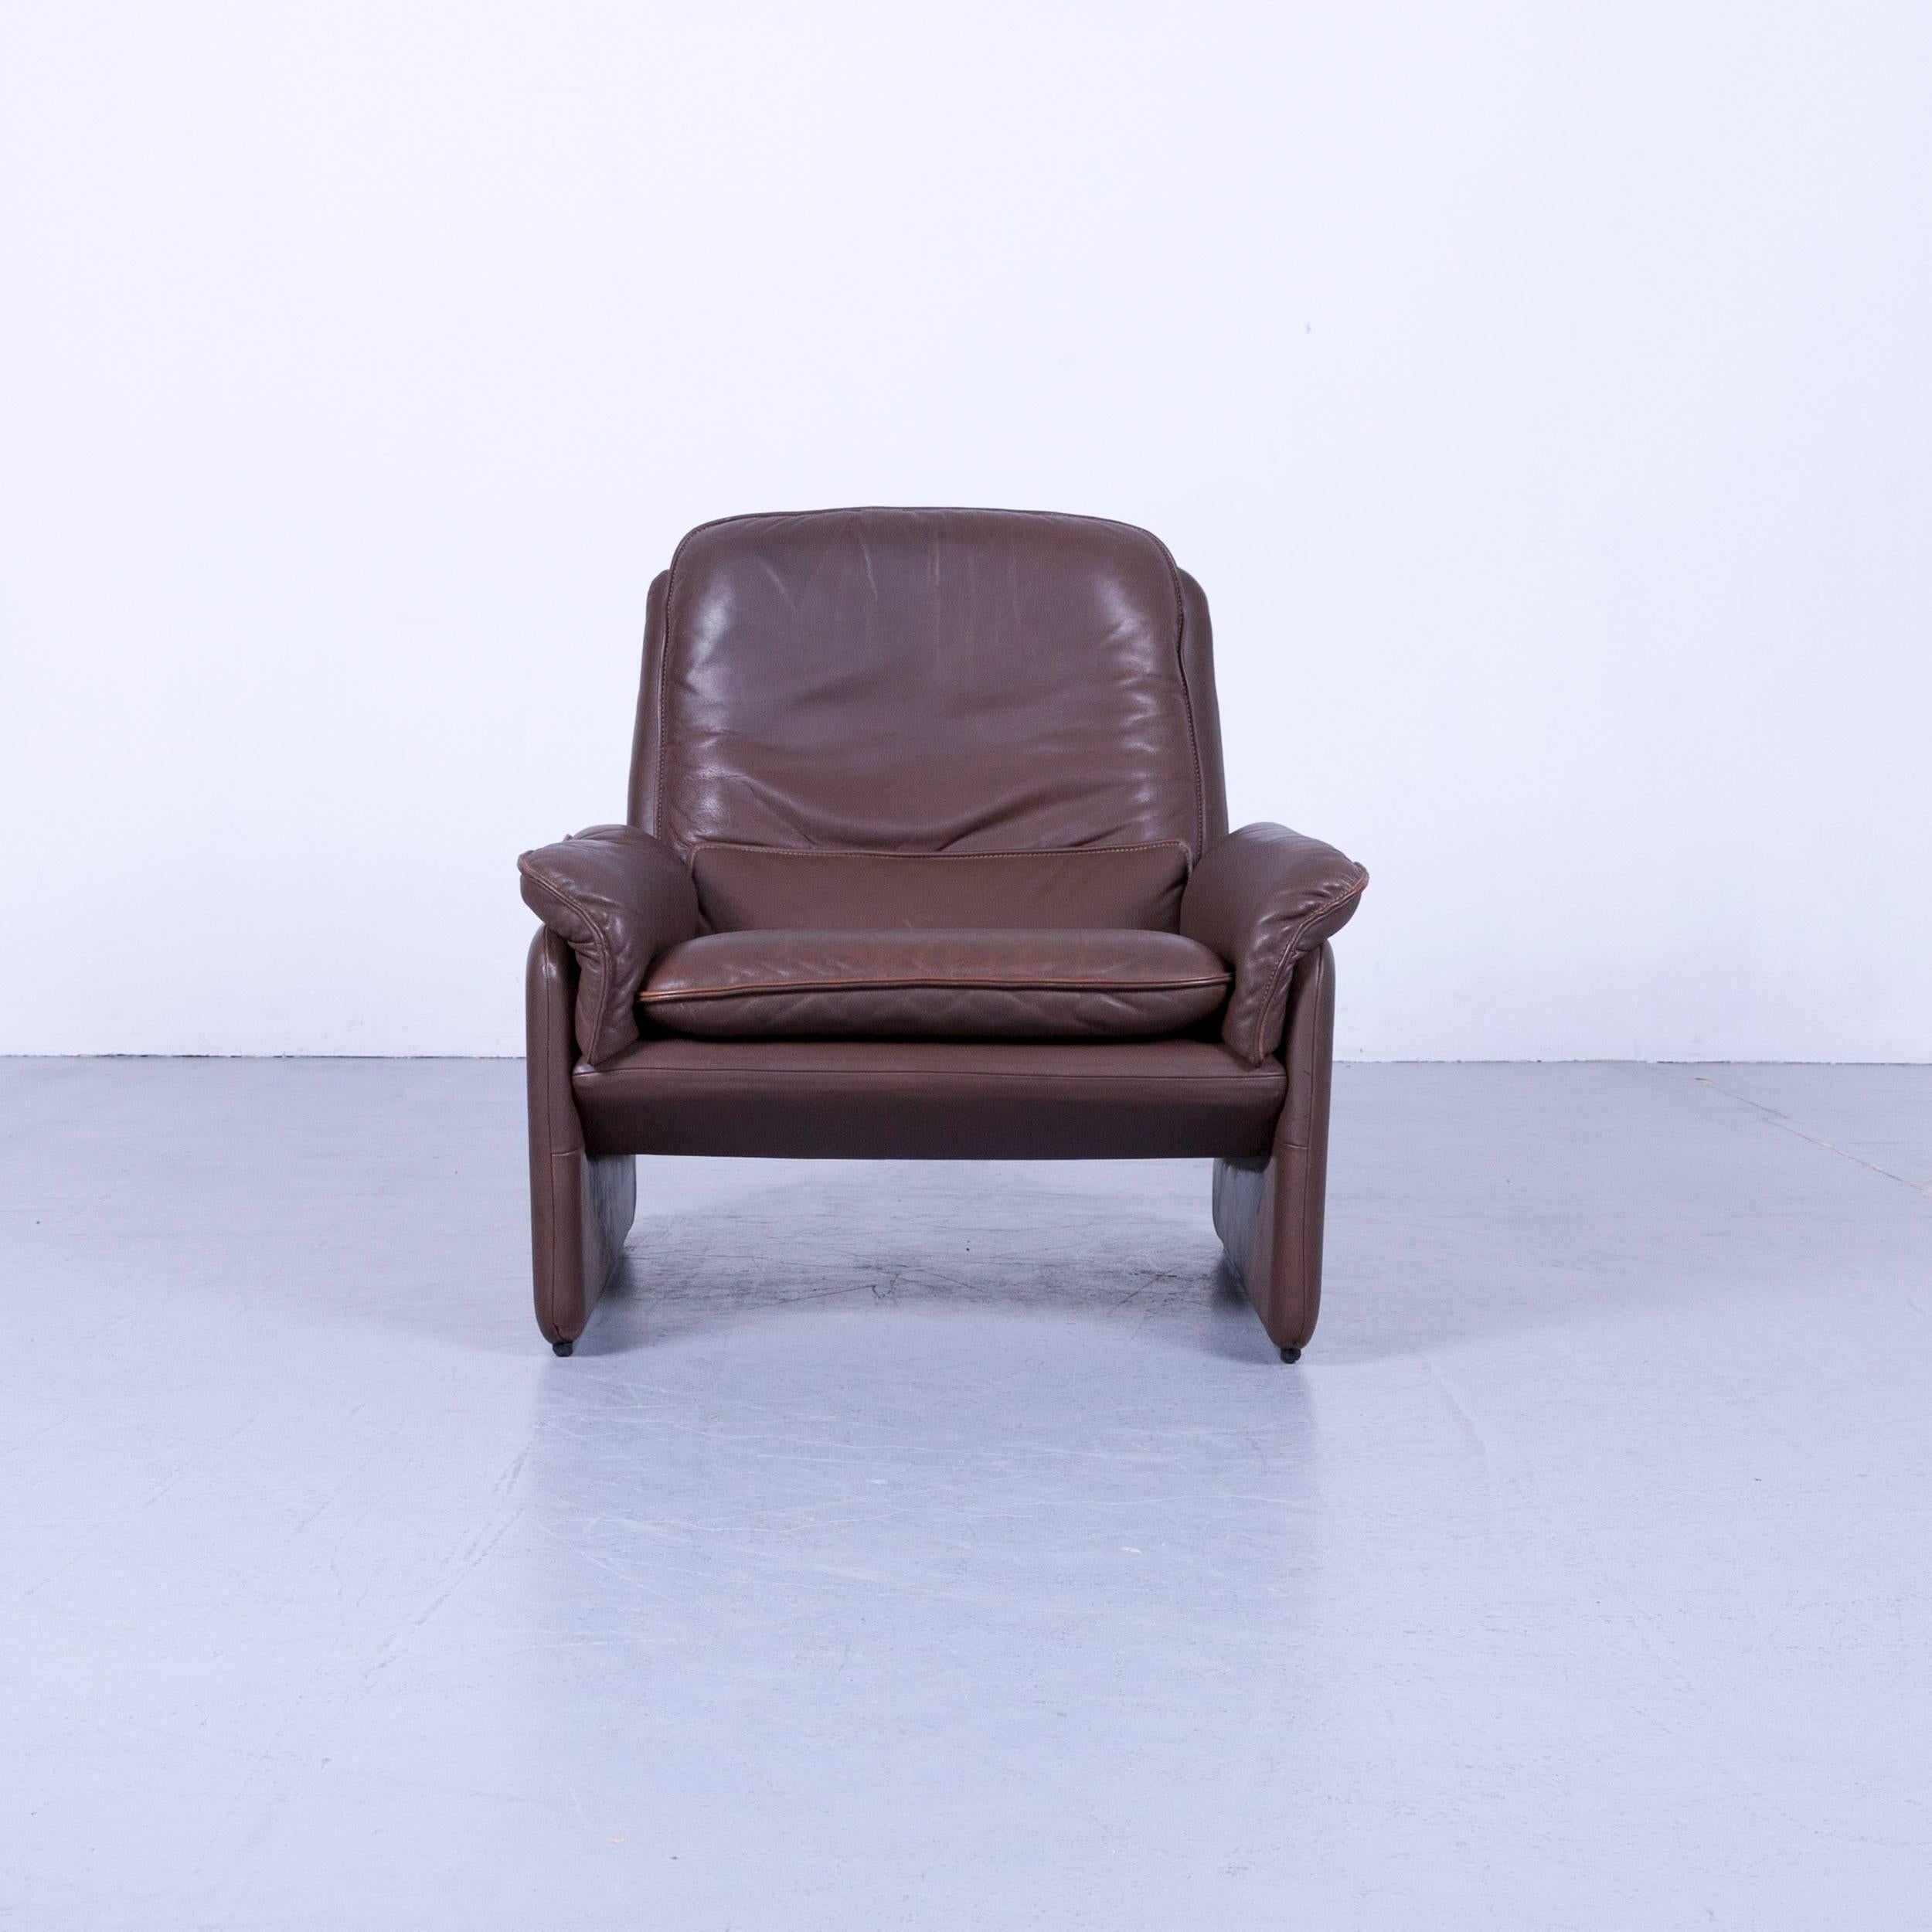 Brown colored original De Sede designer leather armchair in a minimalistic and modern design, made for pure comfort and flexibility.